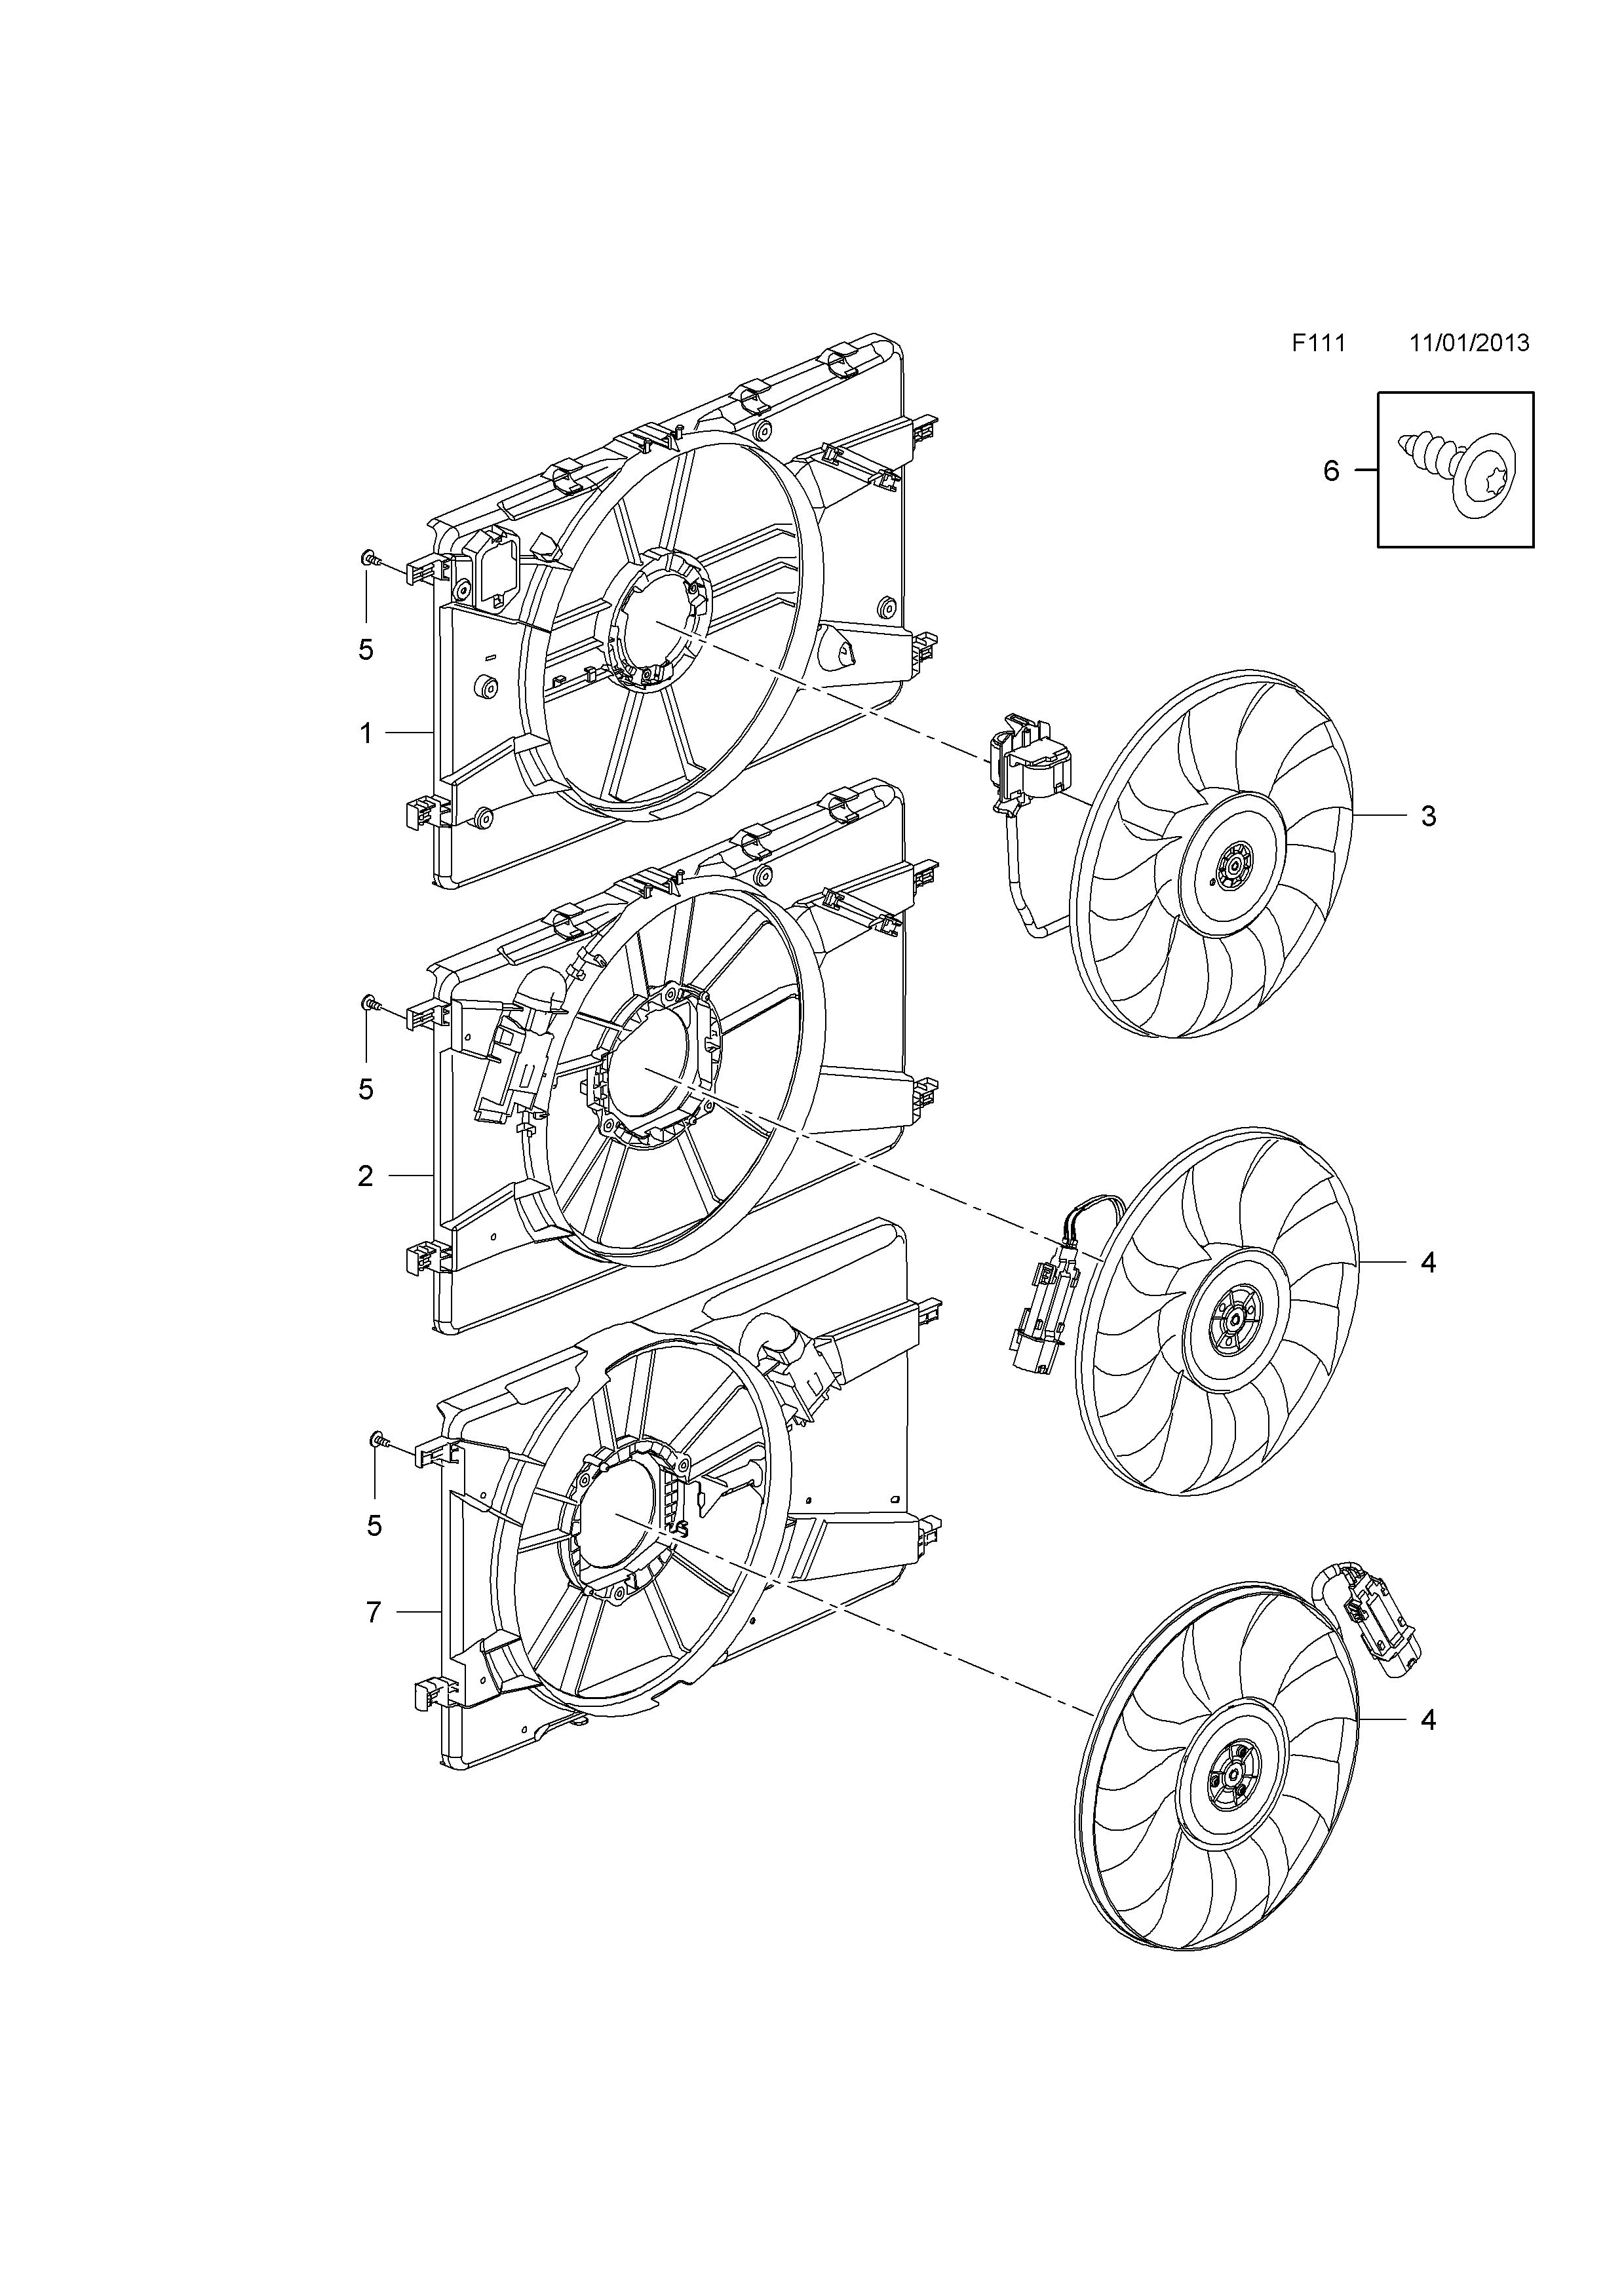 FAN AND DRIVE <small><i>[DIESEL ENGINES]</i></small>